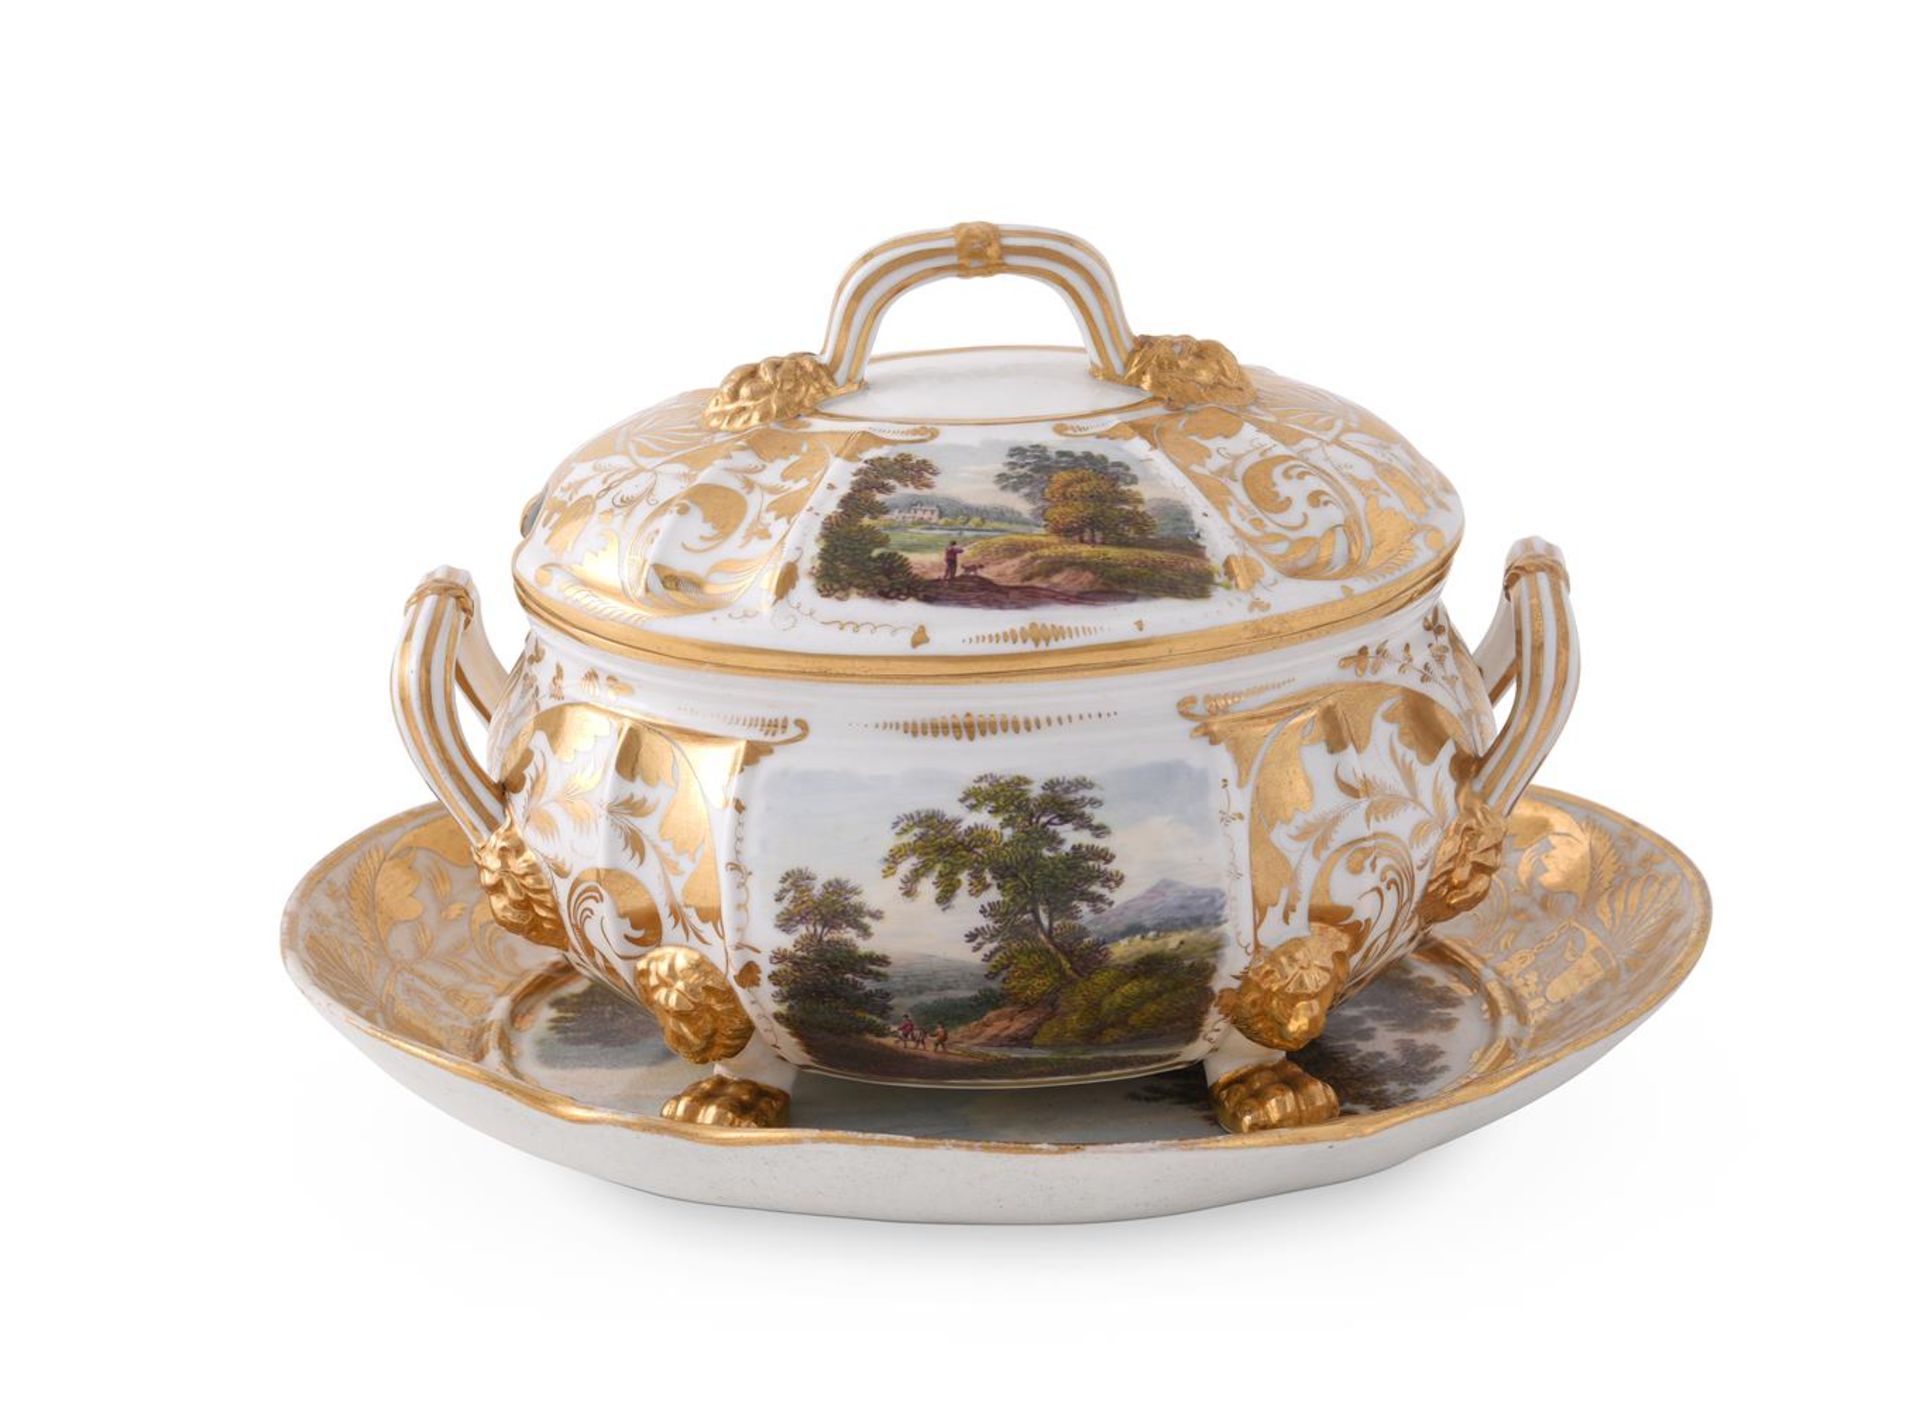 A DERBY PORCELAIN COMPOSITE TOPOGRAPHICAL PART DESSERT SERVICE, FIRST QUARTER 19TH CENTURY - Image 5 of 5